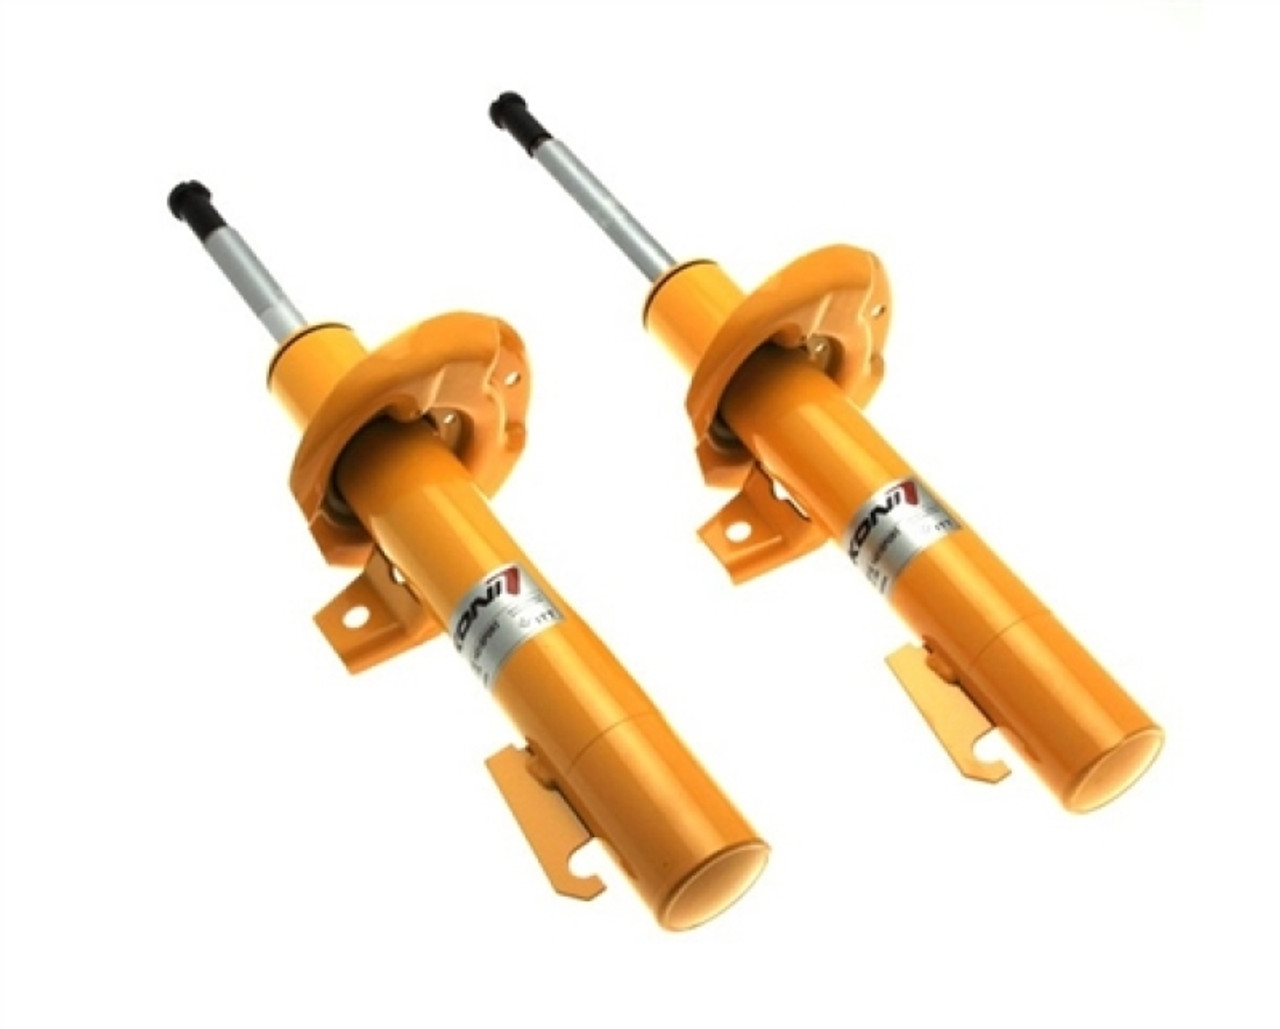 Koni Sport (Yellow) Shock 00-09 Honda S2000 - Left Front w/Spring Perch - 8041 1278LSP1 Photo - Primary